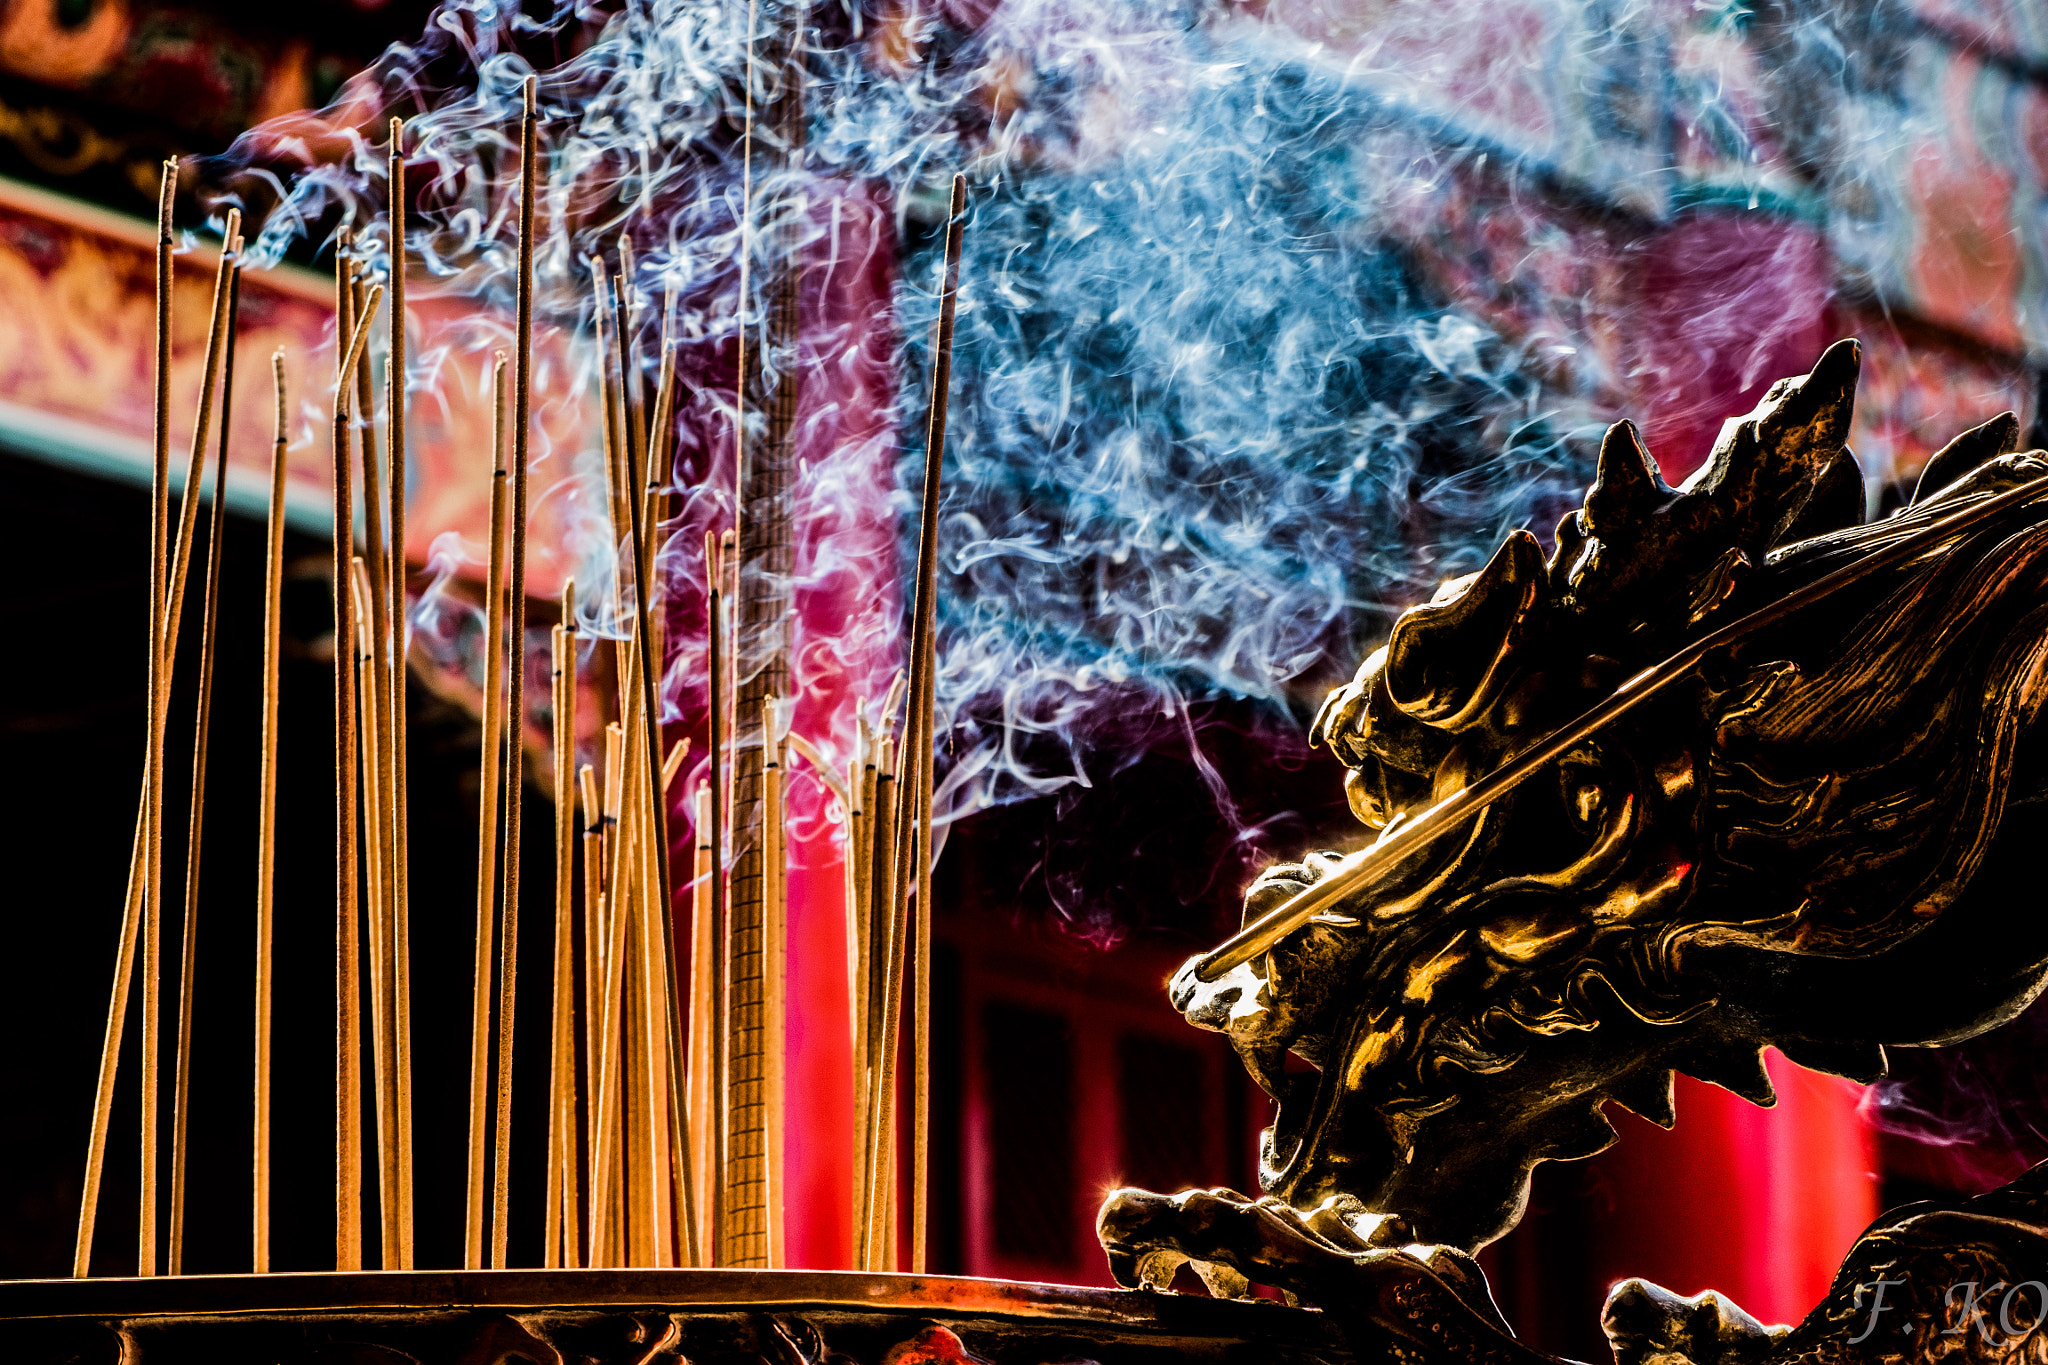 Olympus OM-D E-M5 II sample photo. Burning incense sincerely photography